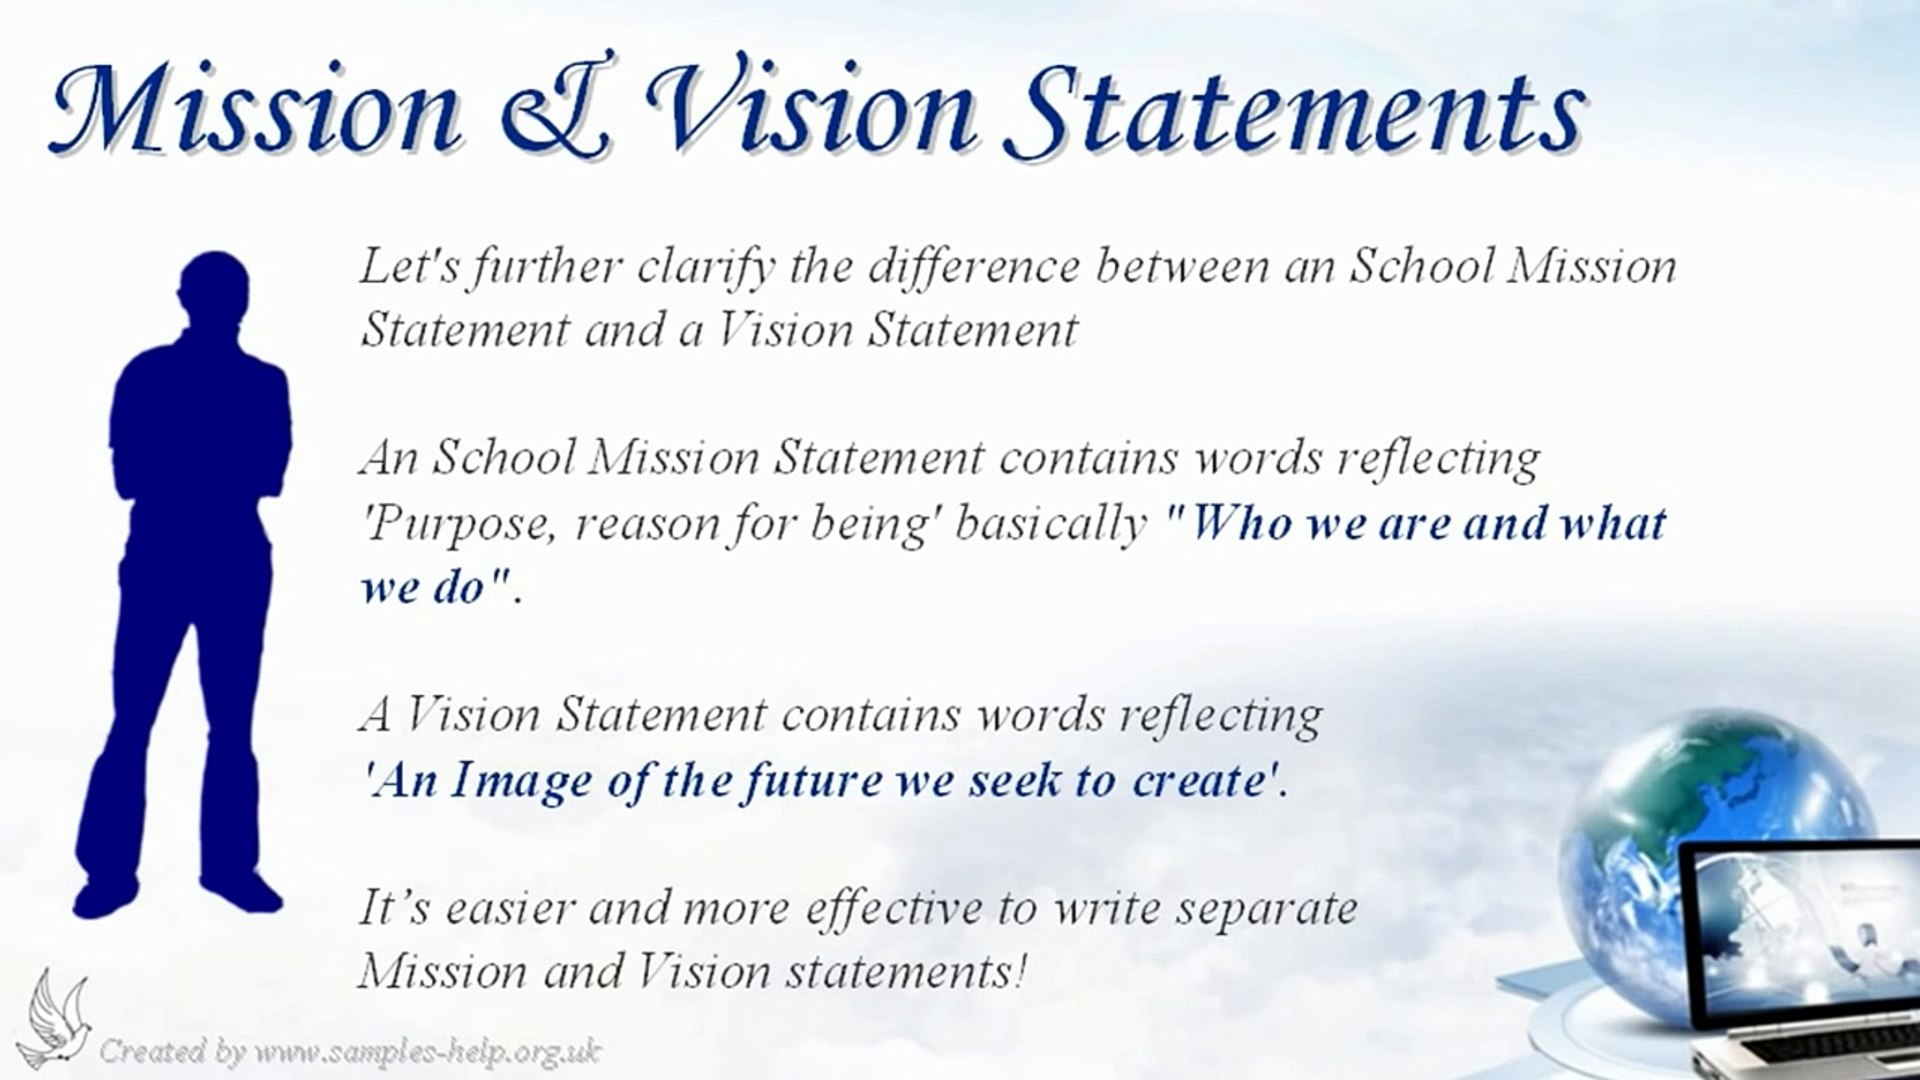 How to write School Mission Statements